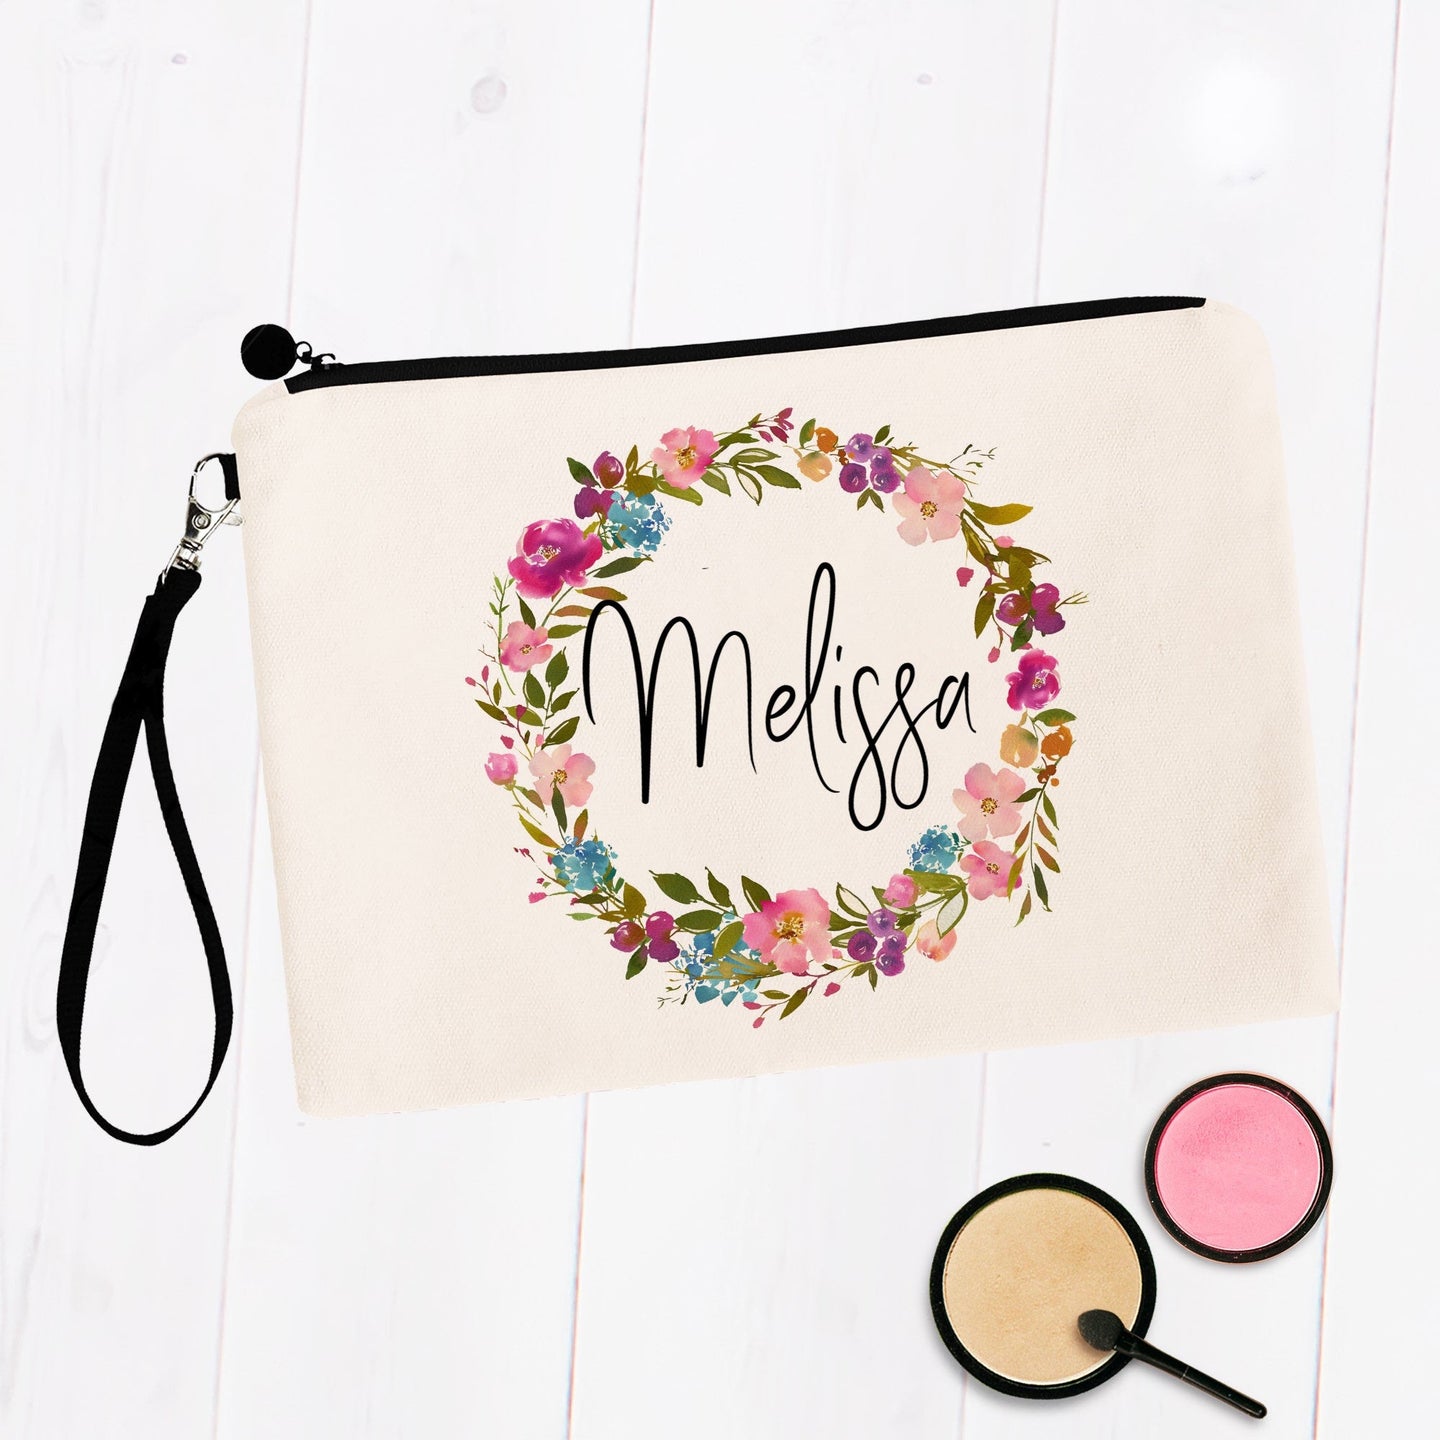 Personalized Makeup Bag with Floral Wreath